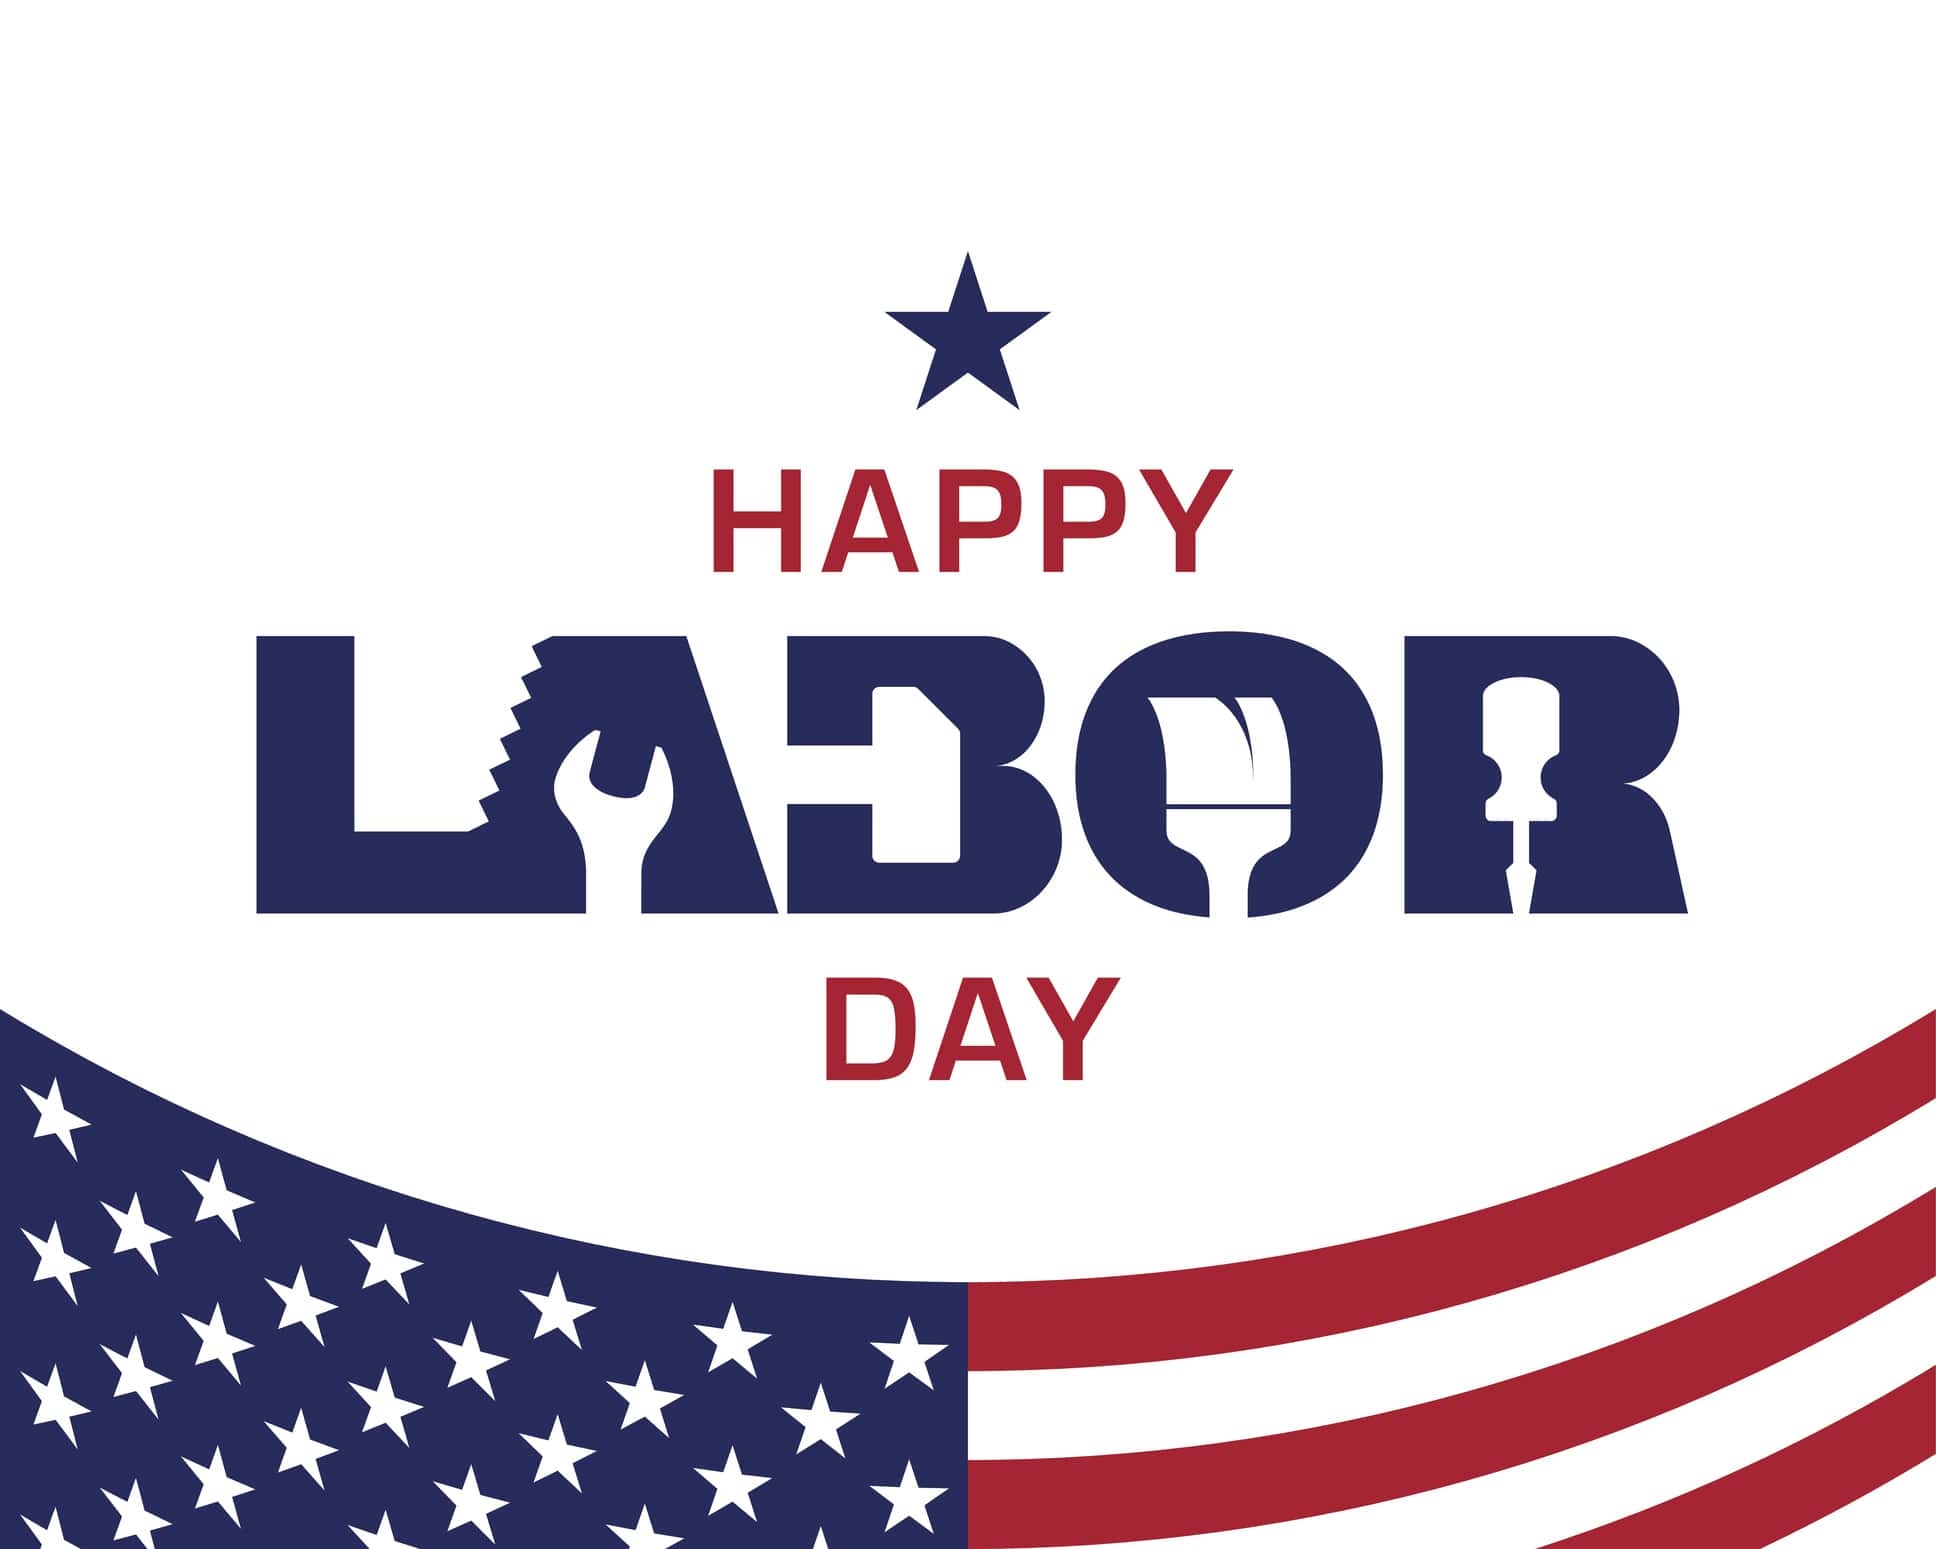 Labor Day Holiday, Happy labor day 2019, Wish pictures, Images, 1940x1550 HD Desktop